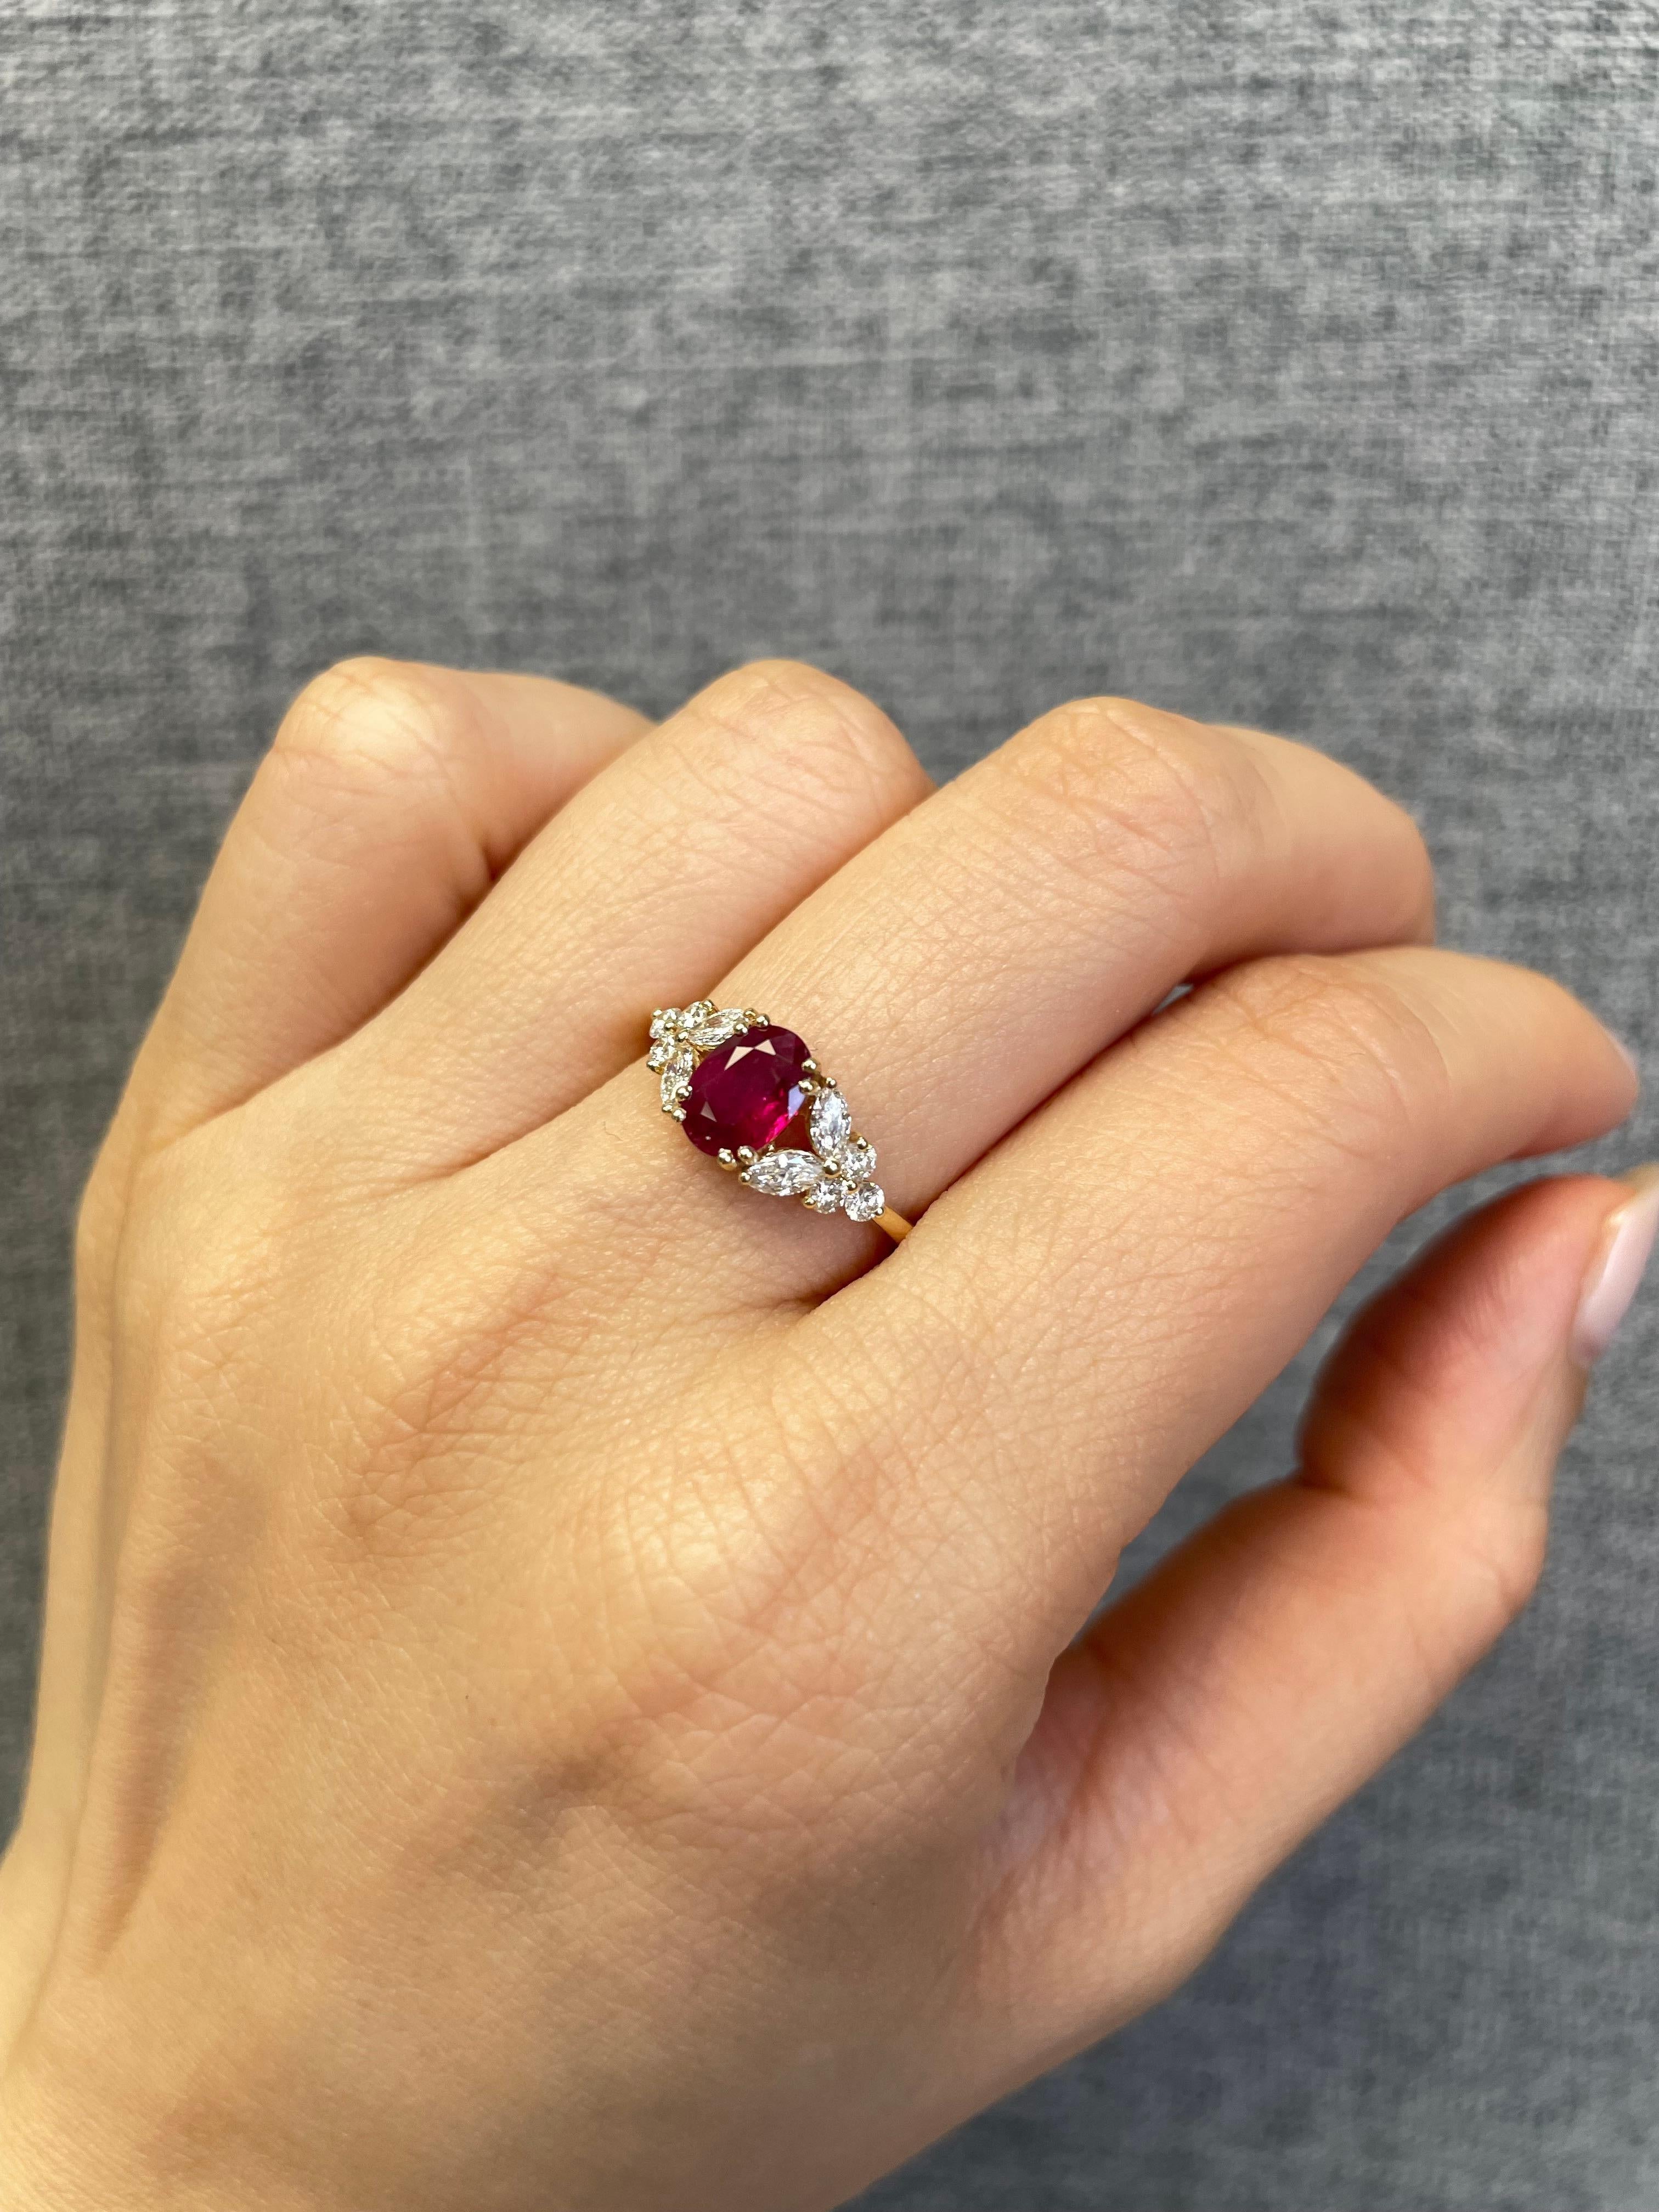 For Sale:  Natural Genuine Ruby and Marquise Diamonds Ring Made in 14k Yellow Gold  2